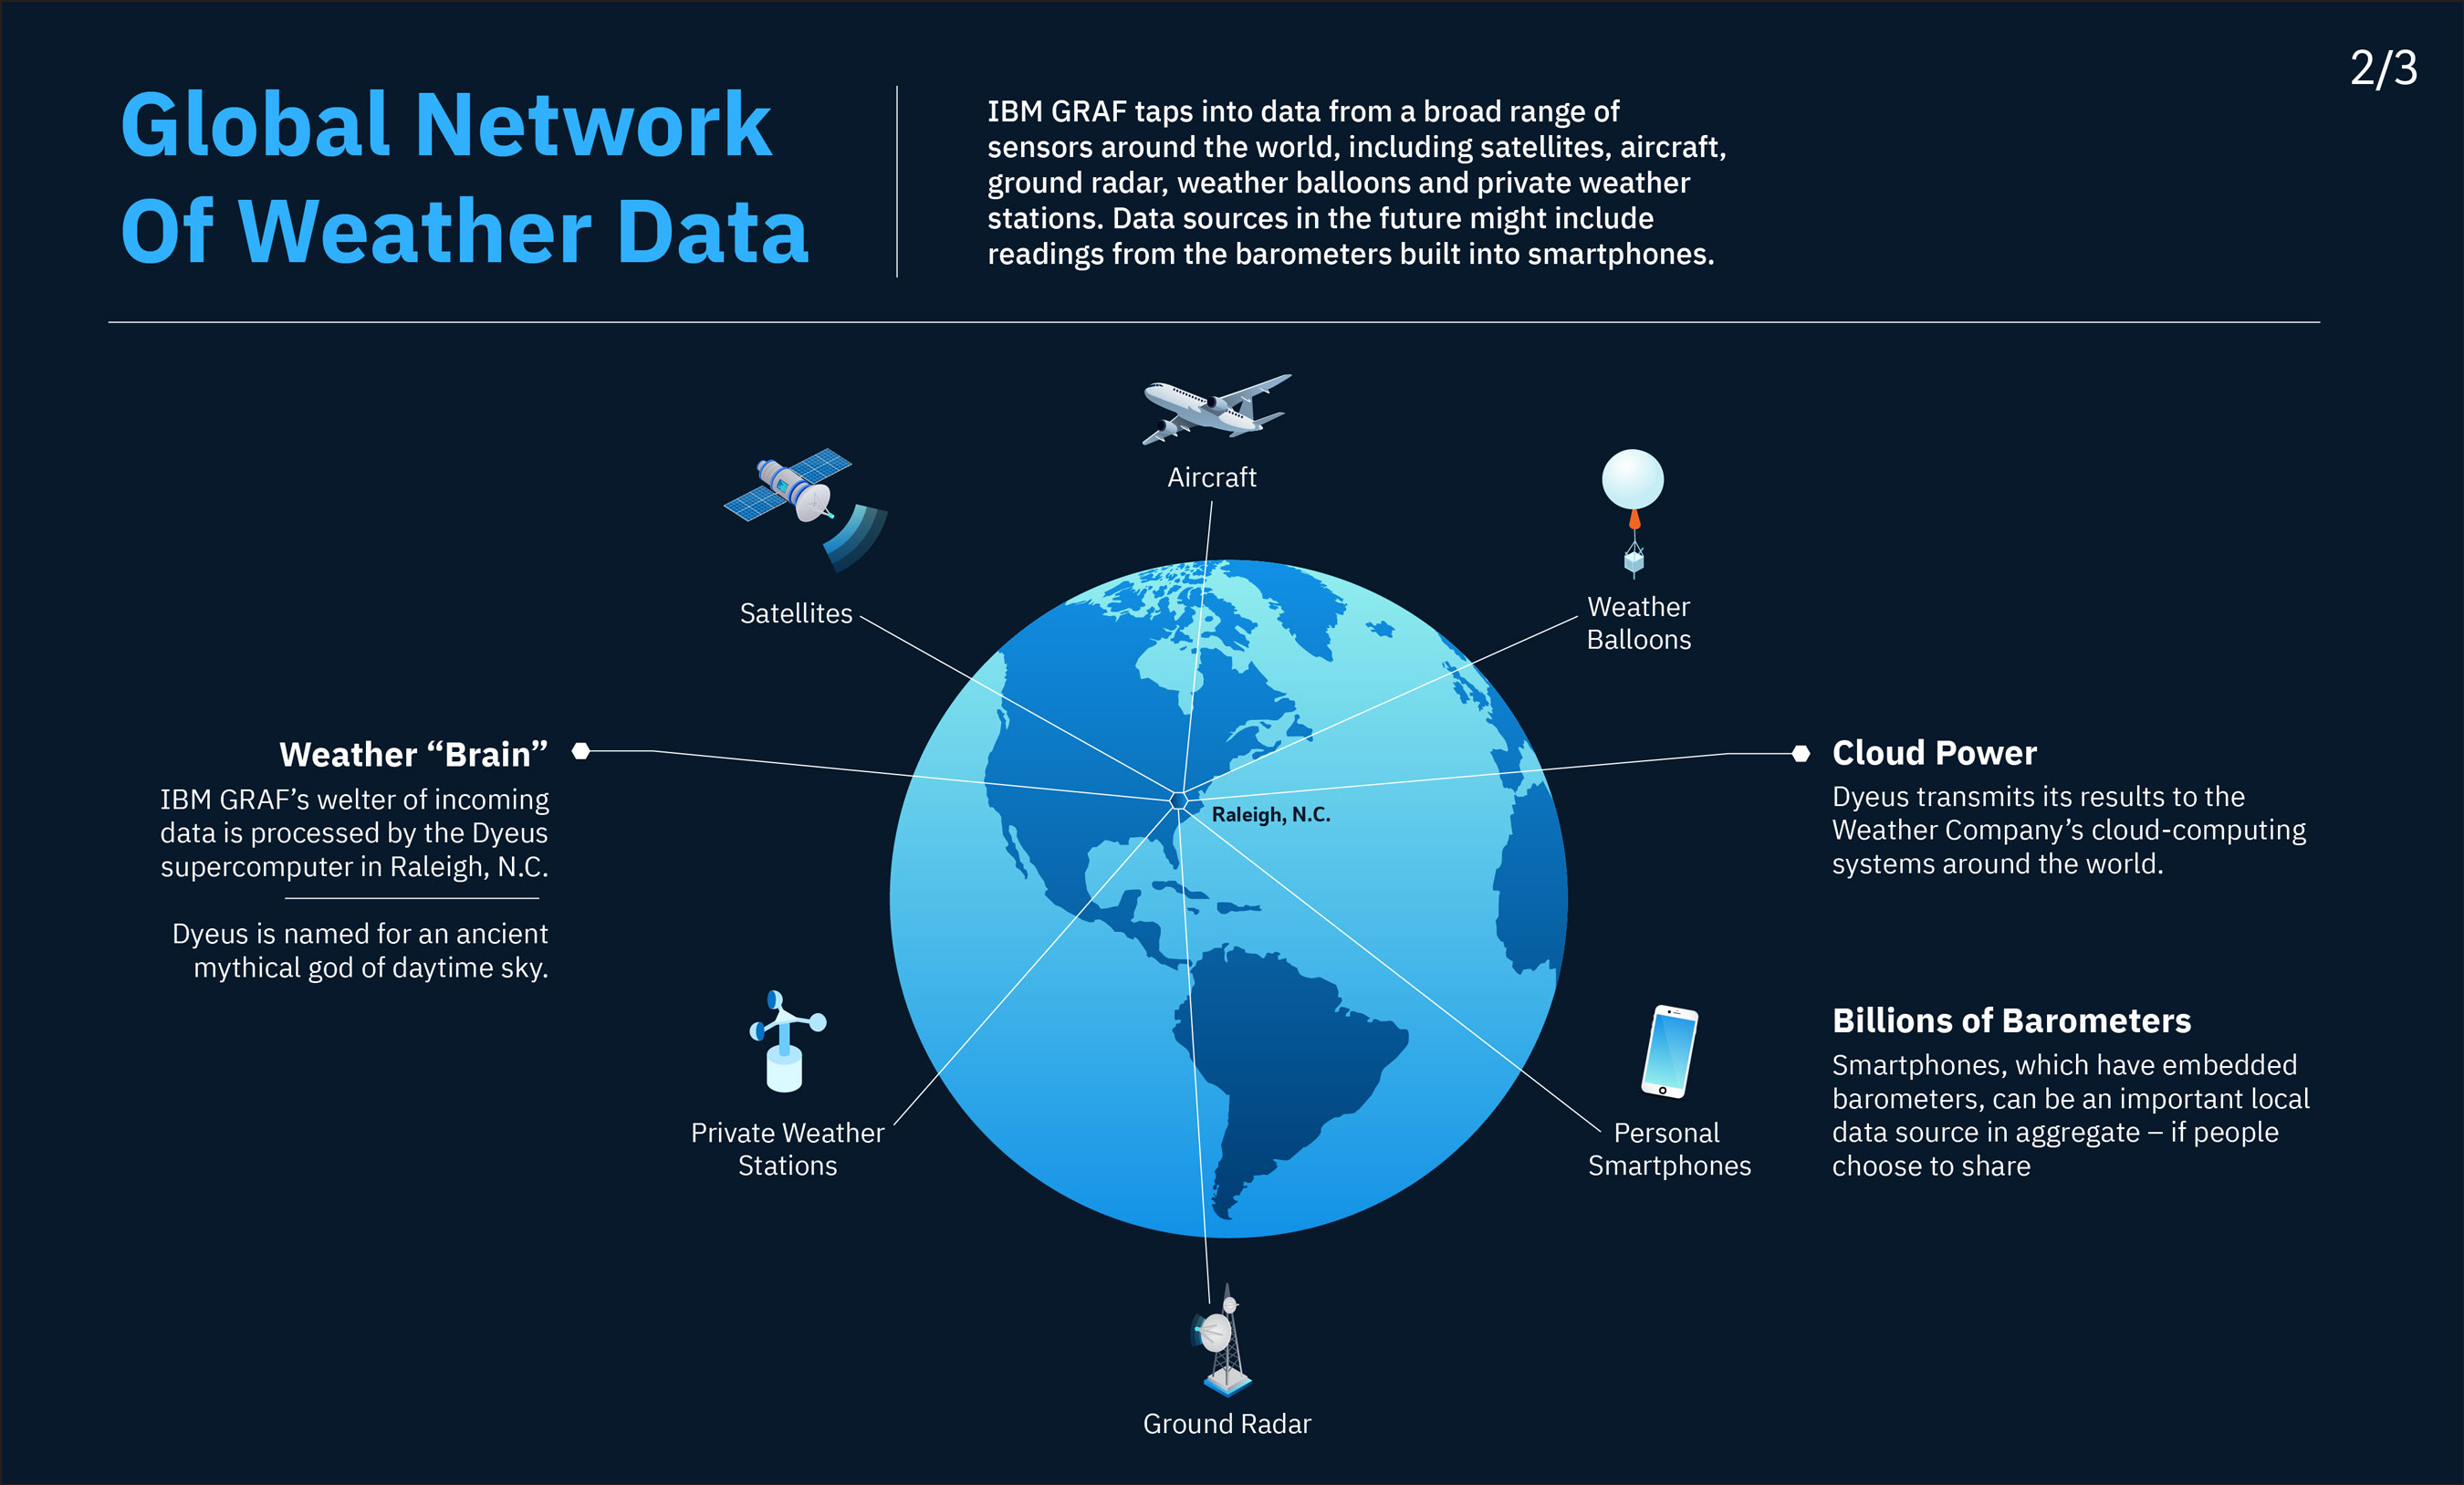 Global Network of Weather Data